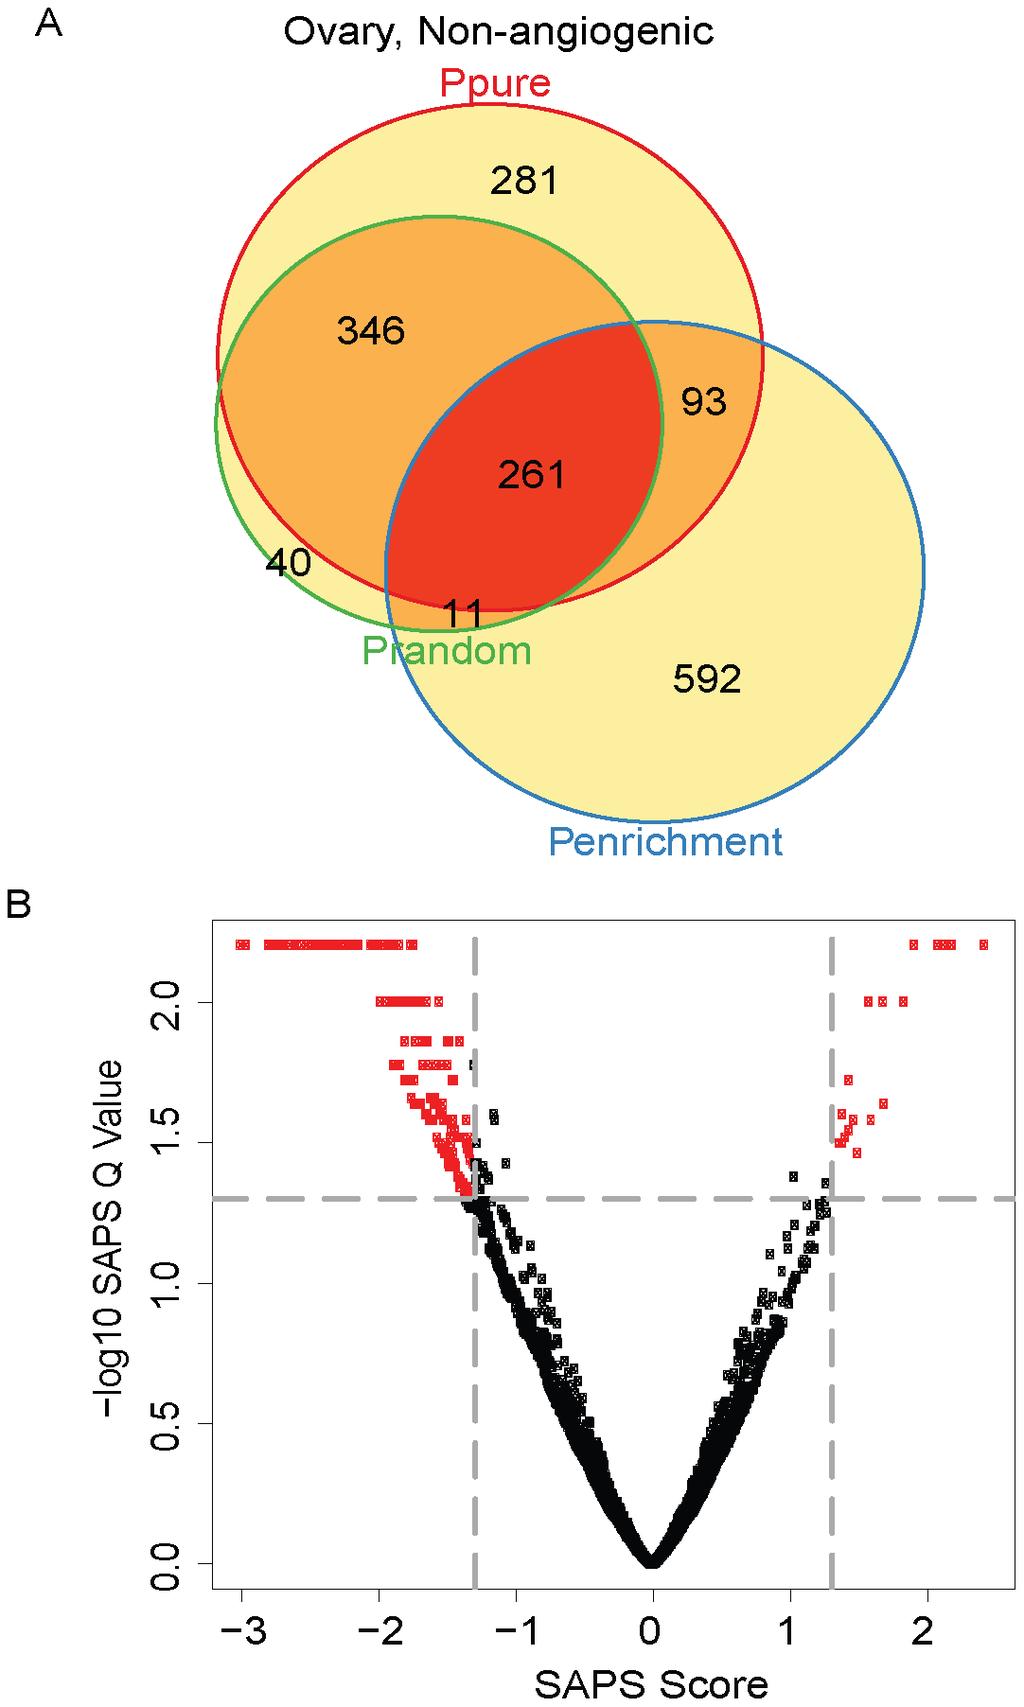 Figure 9. Non-angiogenic subtype Venn diagram and scatterplot. (A) The gene sets significant by at least one of the P values at the 0.05 level are displayed in a Venn diagram.